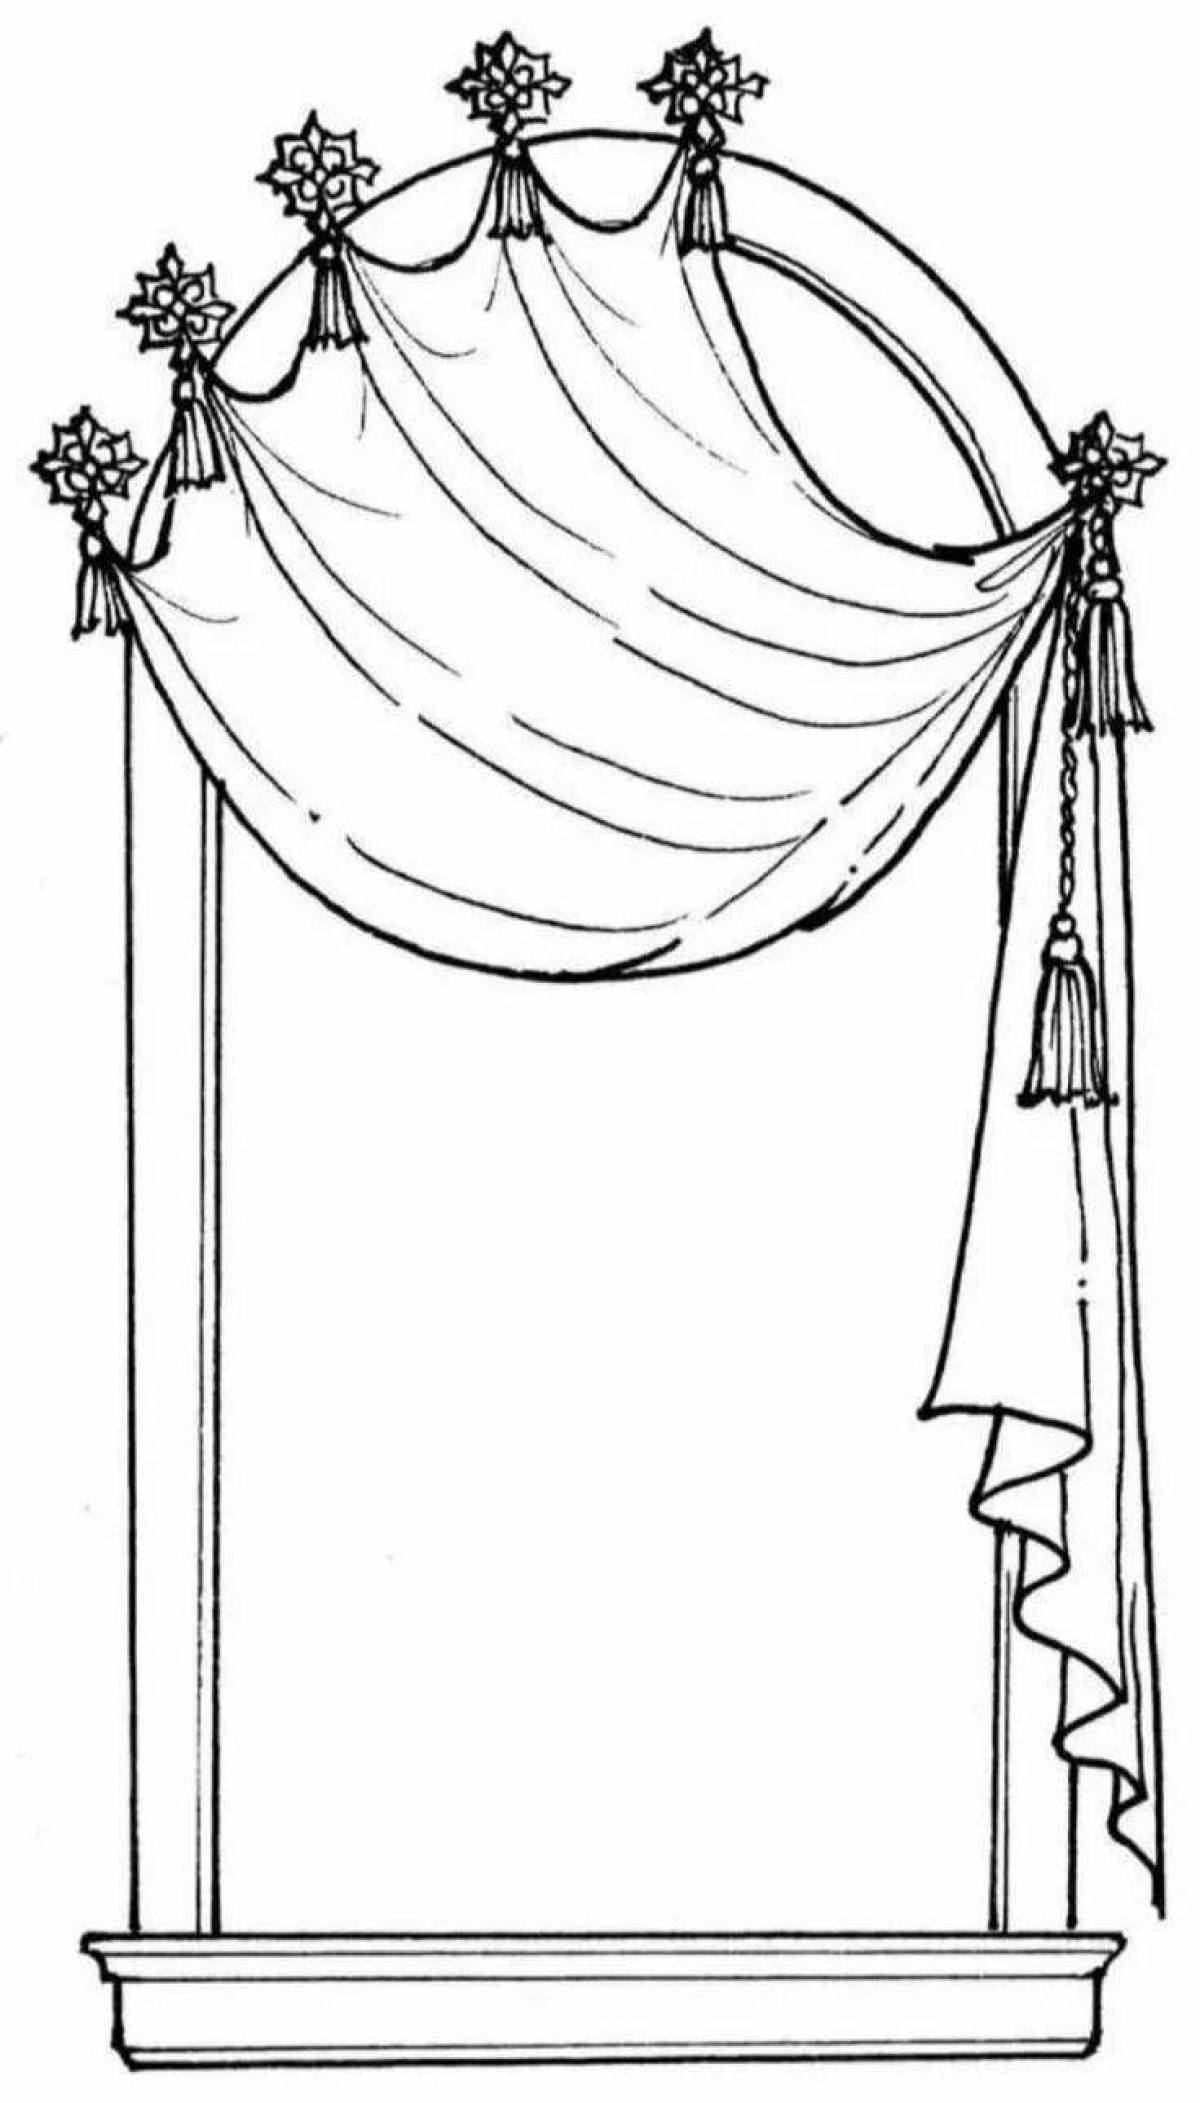 Coloring page elegant theater curtain